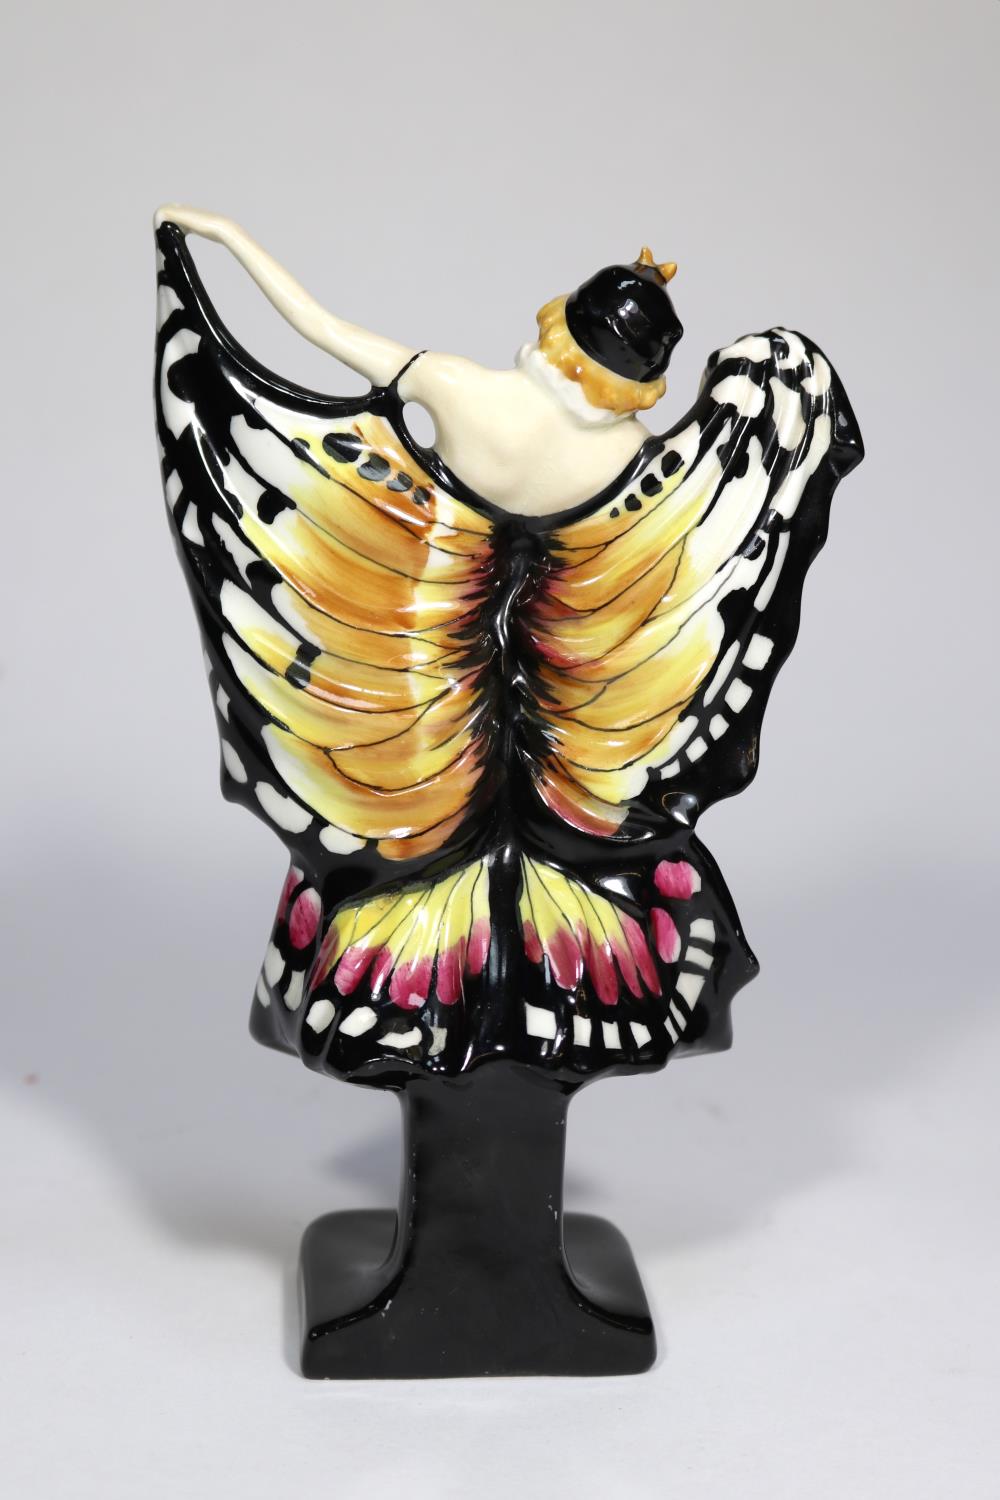 A Royal Doulton 'Butterfly' figurine (HN719) in pink, black and yellow. Designed by L. Harradine. - Image 2 of 3